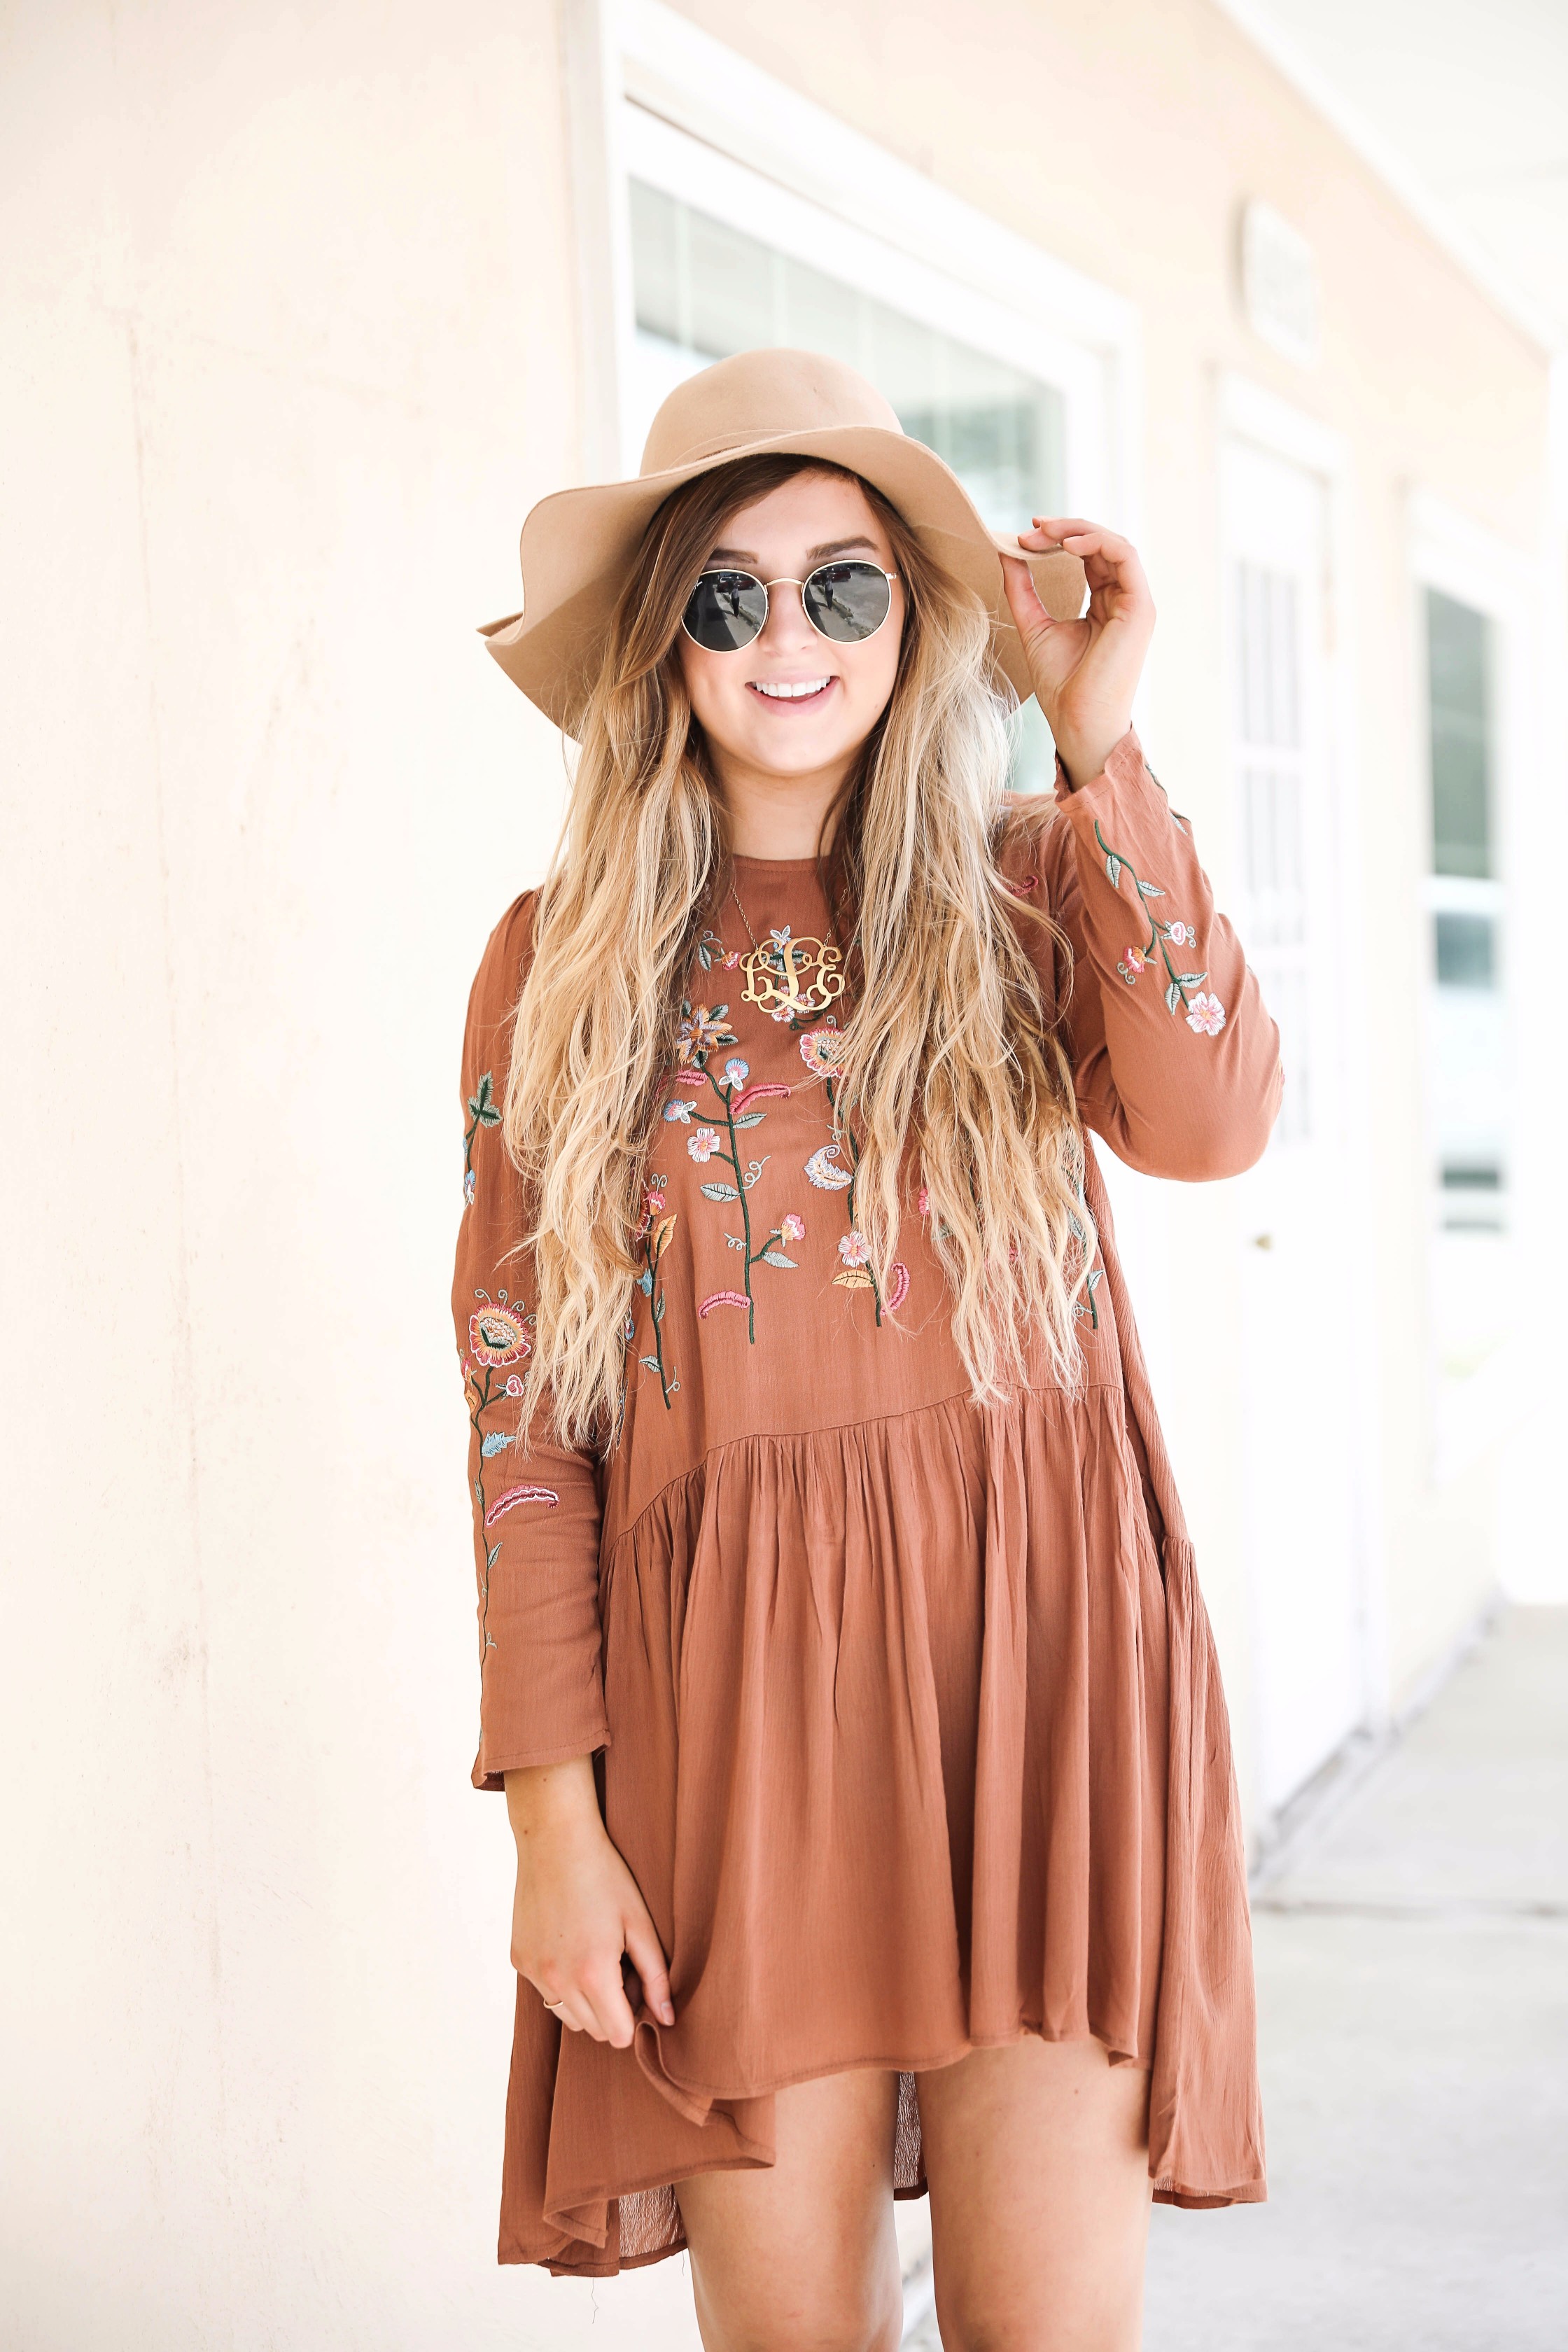 Embroidered dress for fall! I love the cute fall color of the dress too! This outfit is super cute for the fall months! By fashion blogger lauren lindmark on daily dose of charm